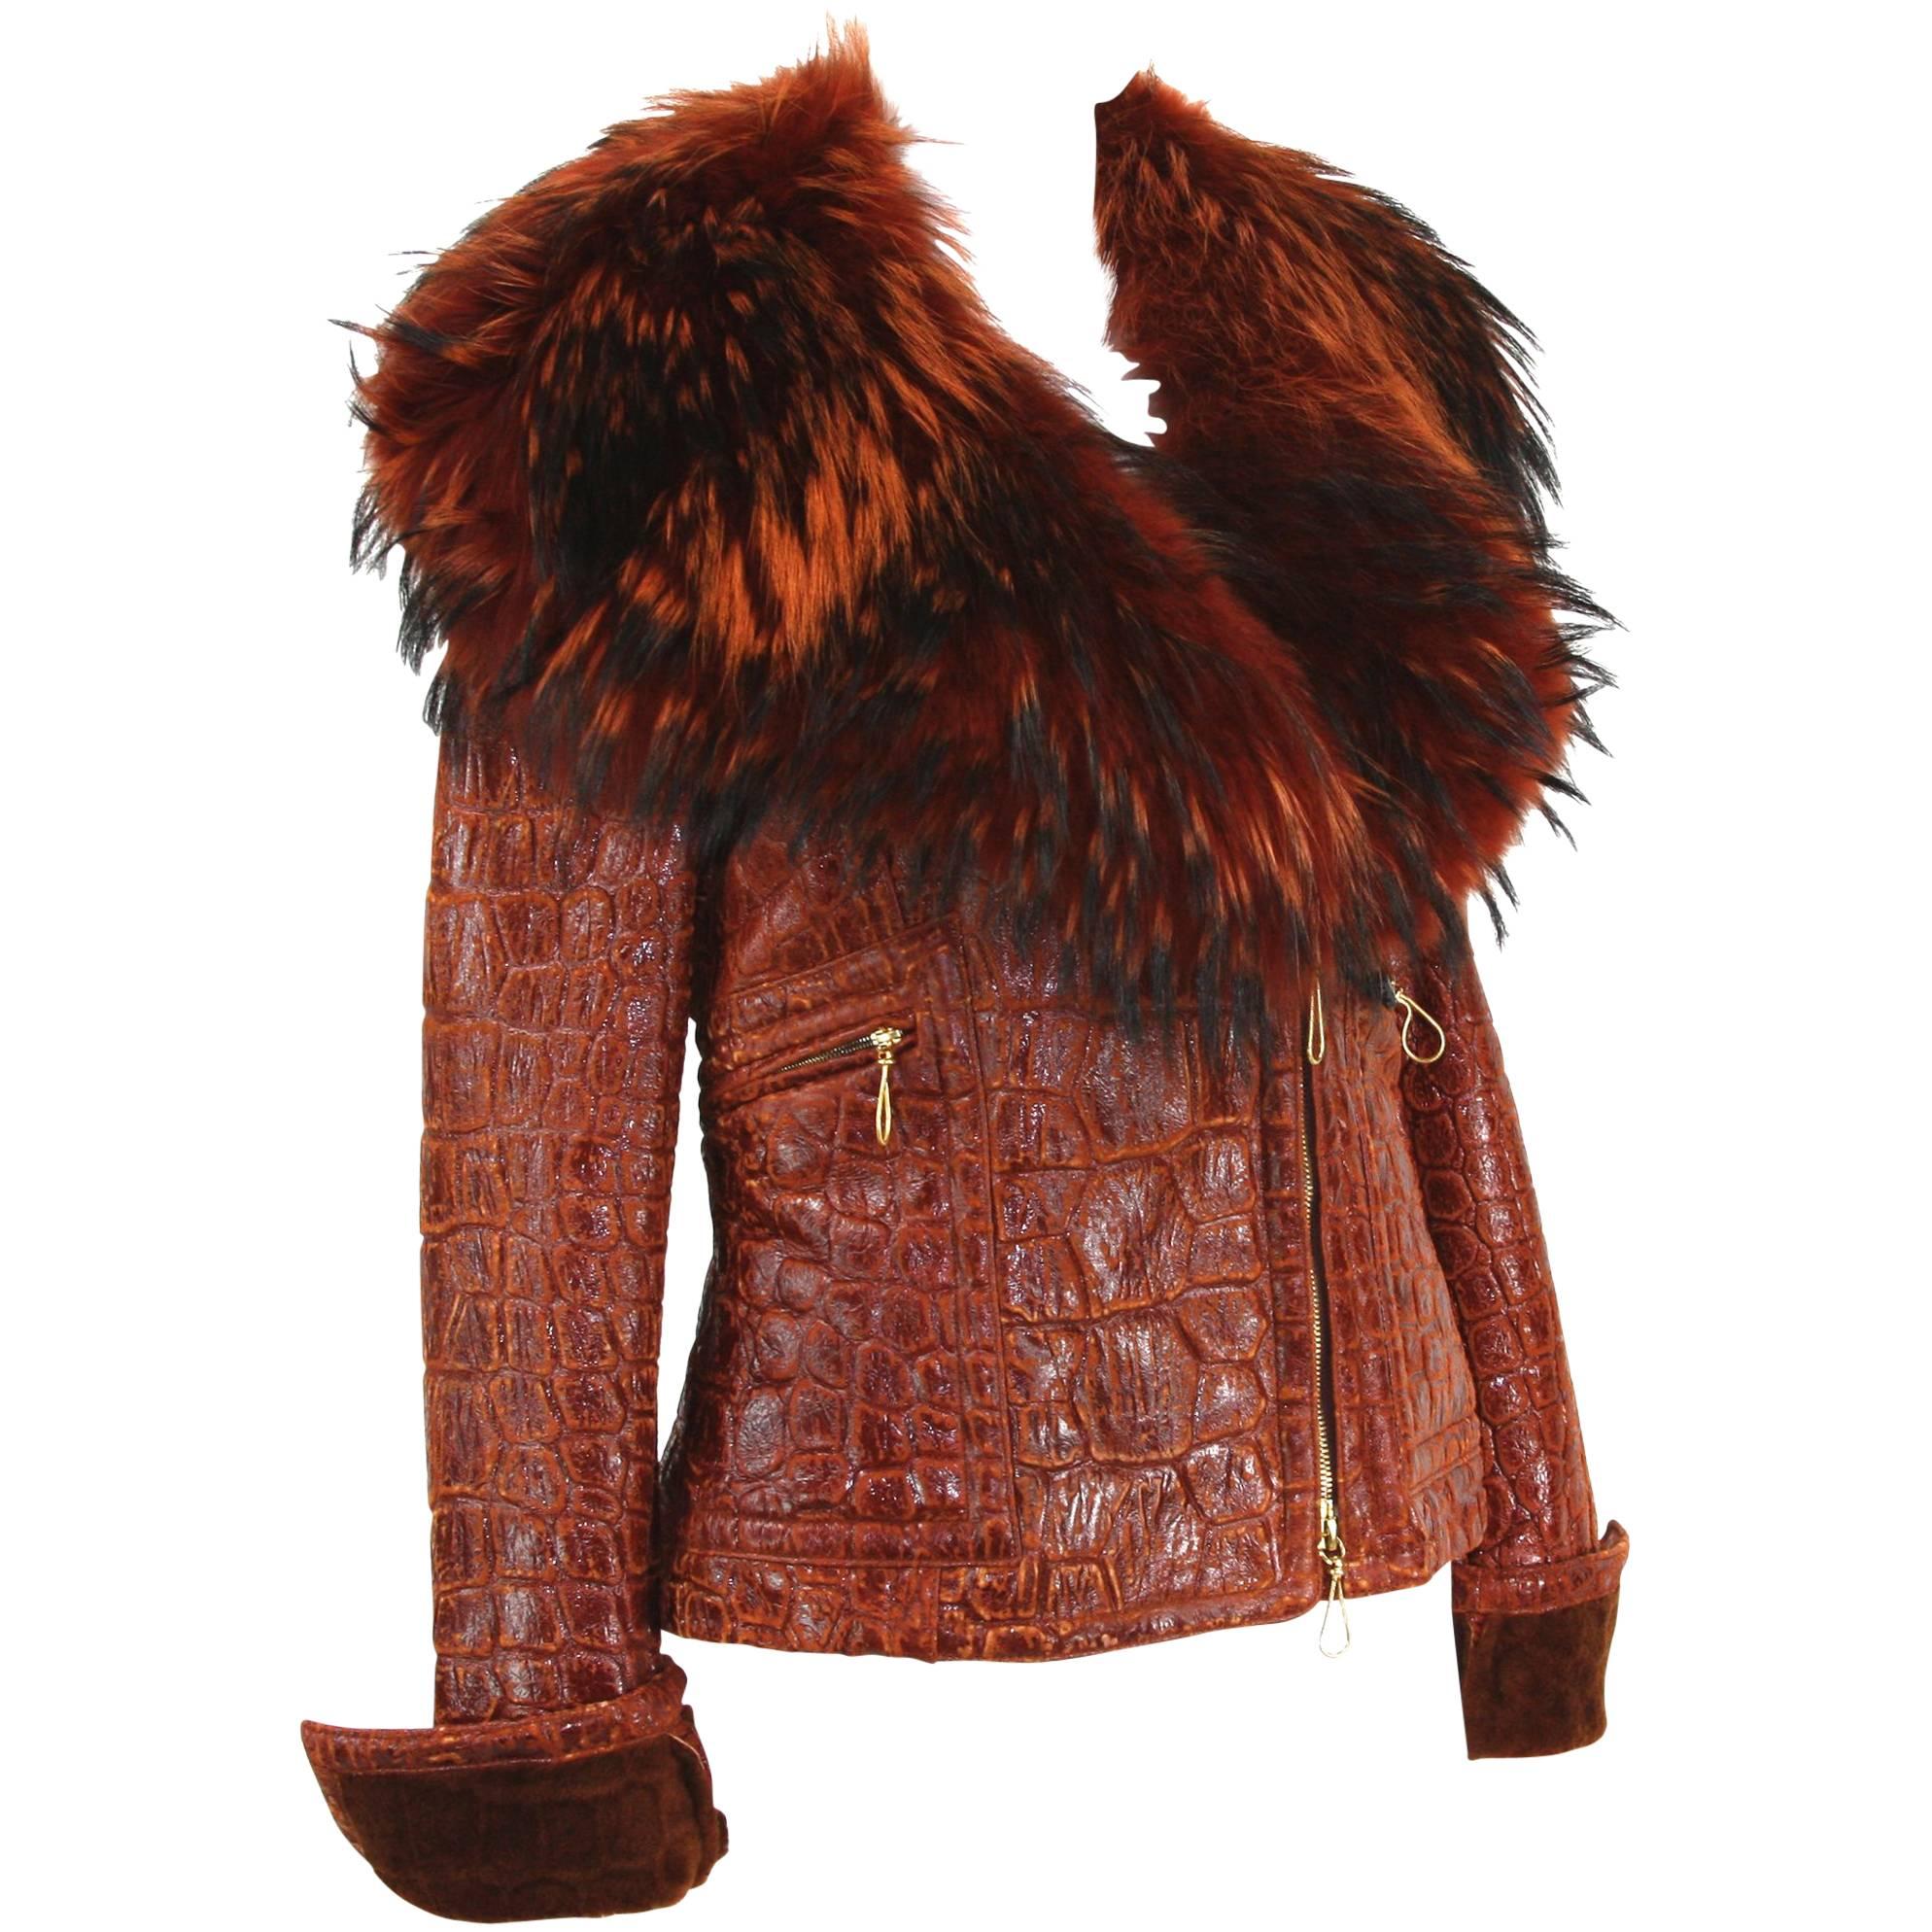 New Iconic Gianfranco Ferre 1993 Croc Embossed Shearling Lamb Cognac Fur Jacket For Sale